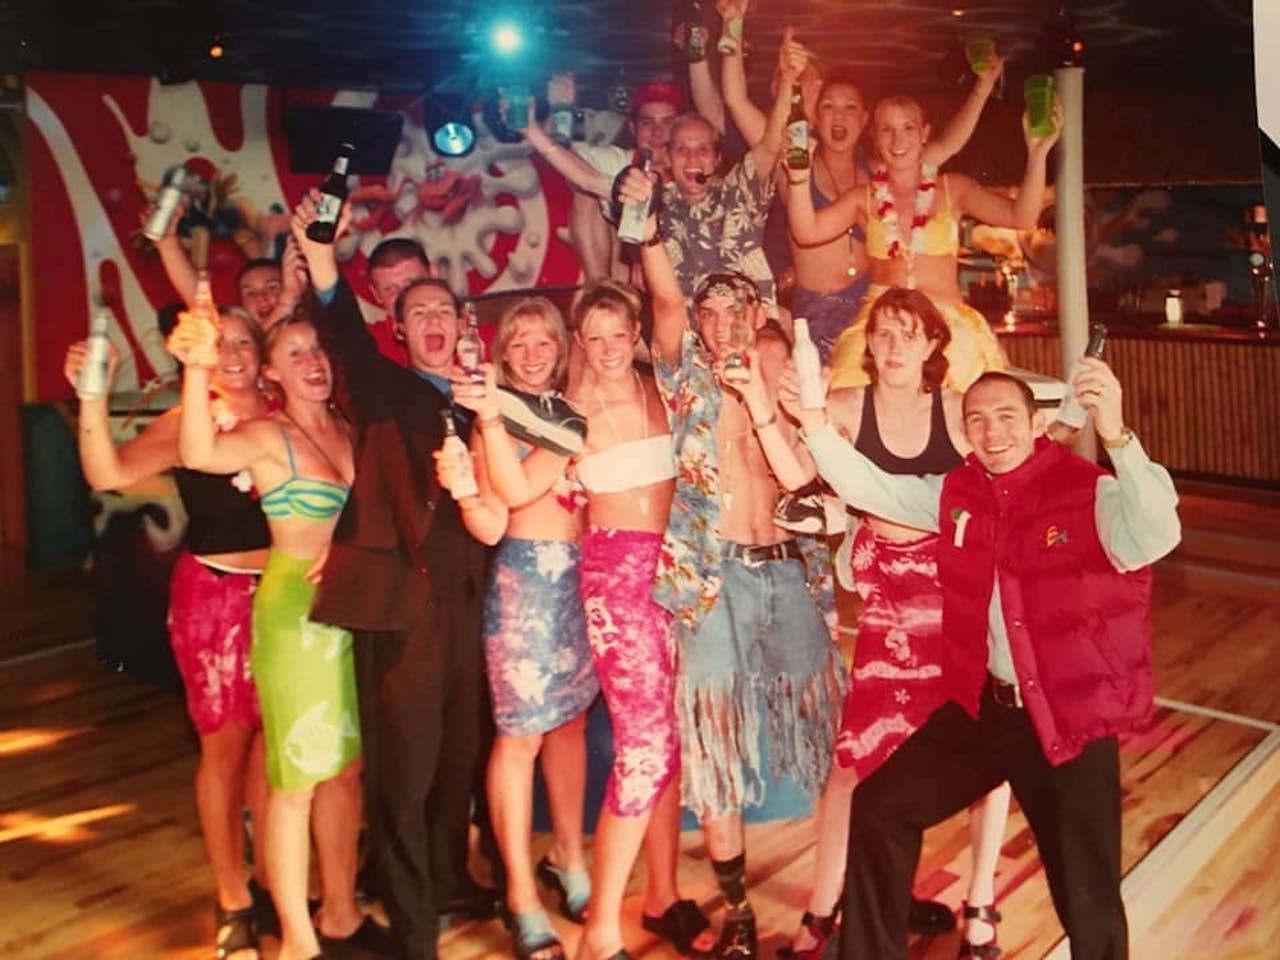 Dirty Stop Out's Guide to 1990s Chesterfield - Dirty Stop Outs